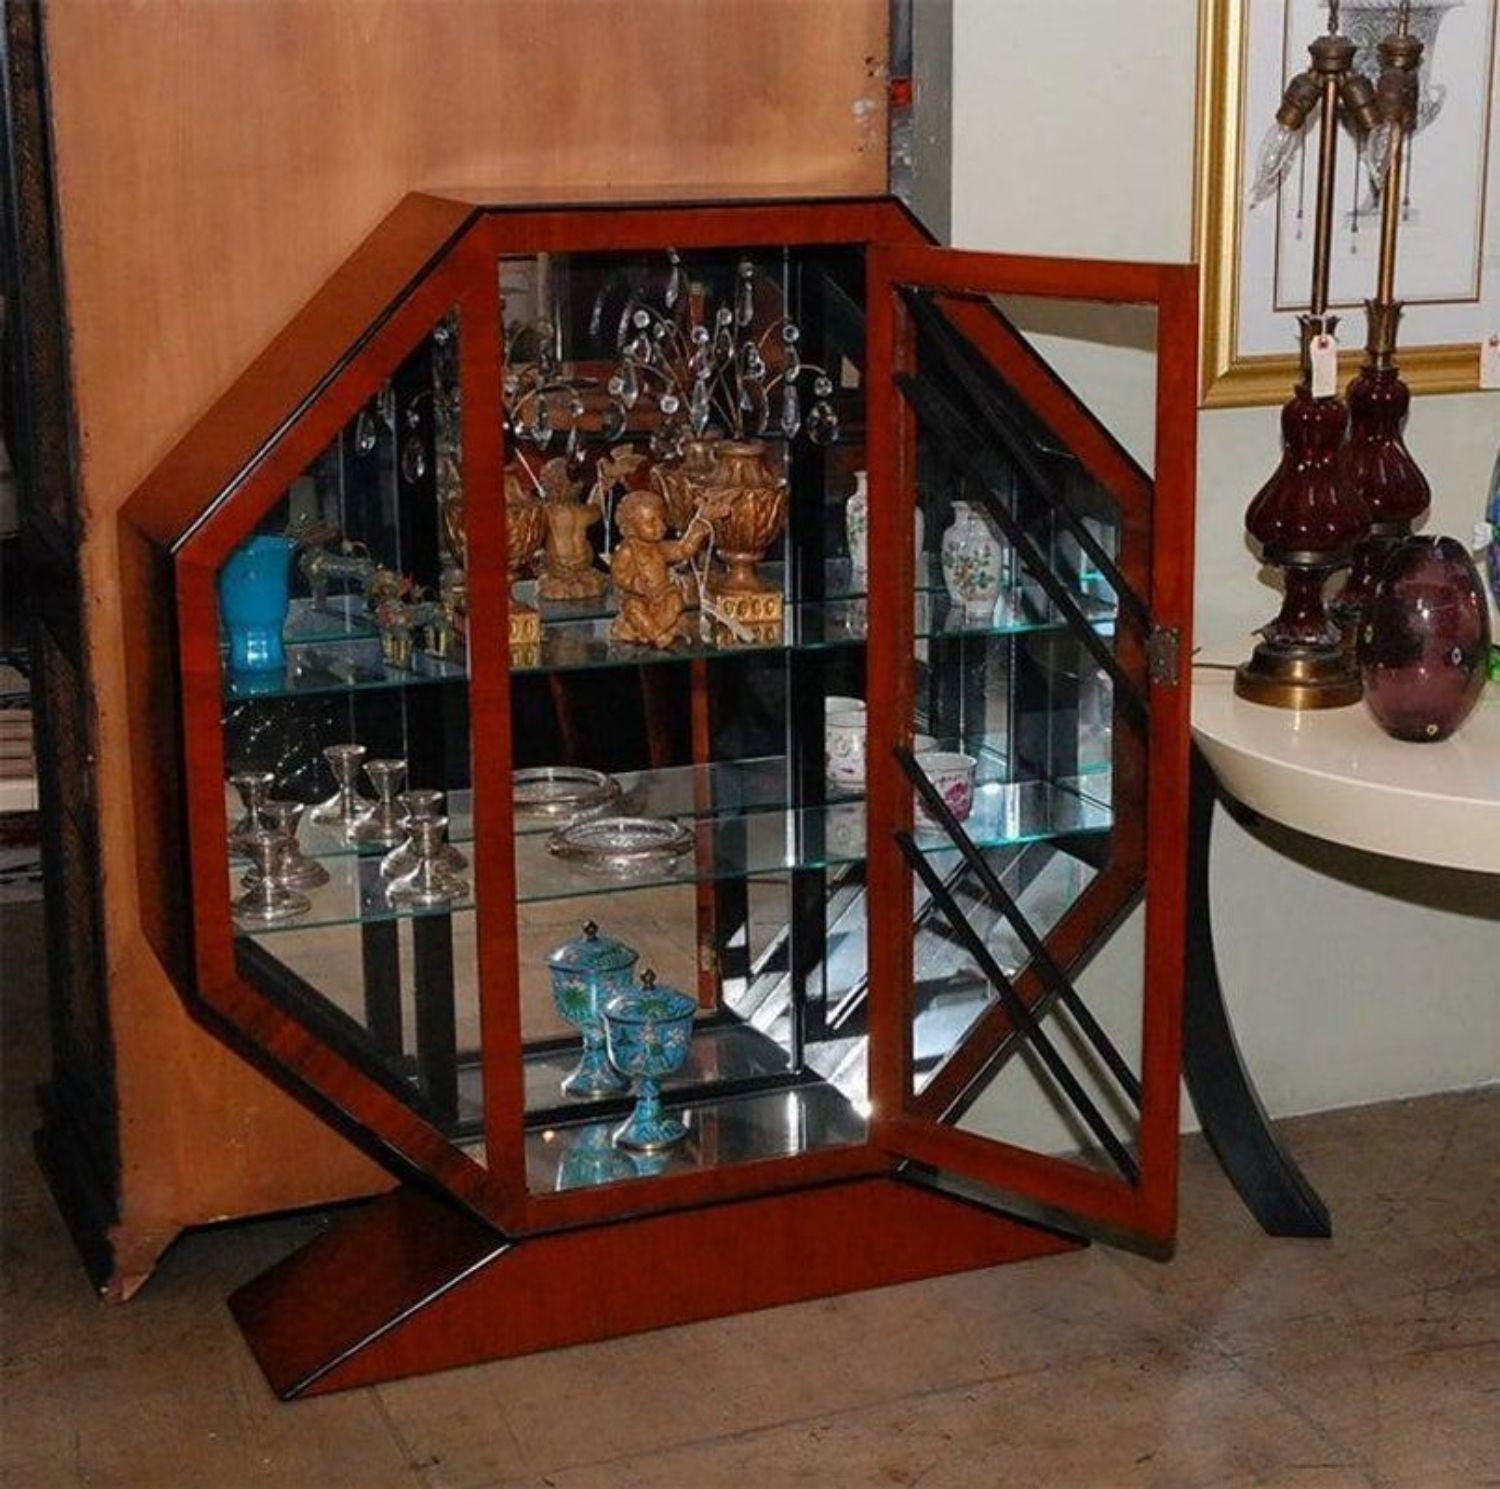 Octagonal cherry vitrine with ebonized wood. Mirrored interior, three glass shelves and center door. Mounted on a triangular base.